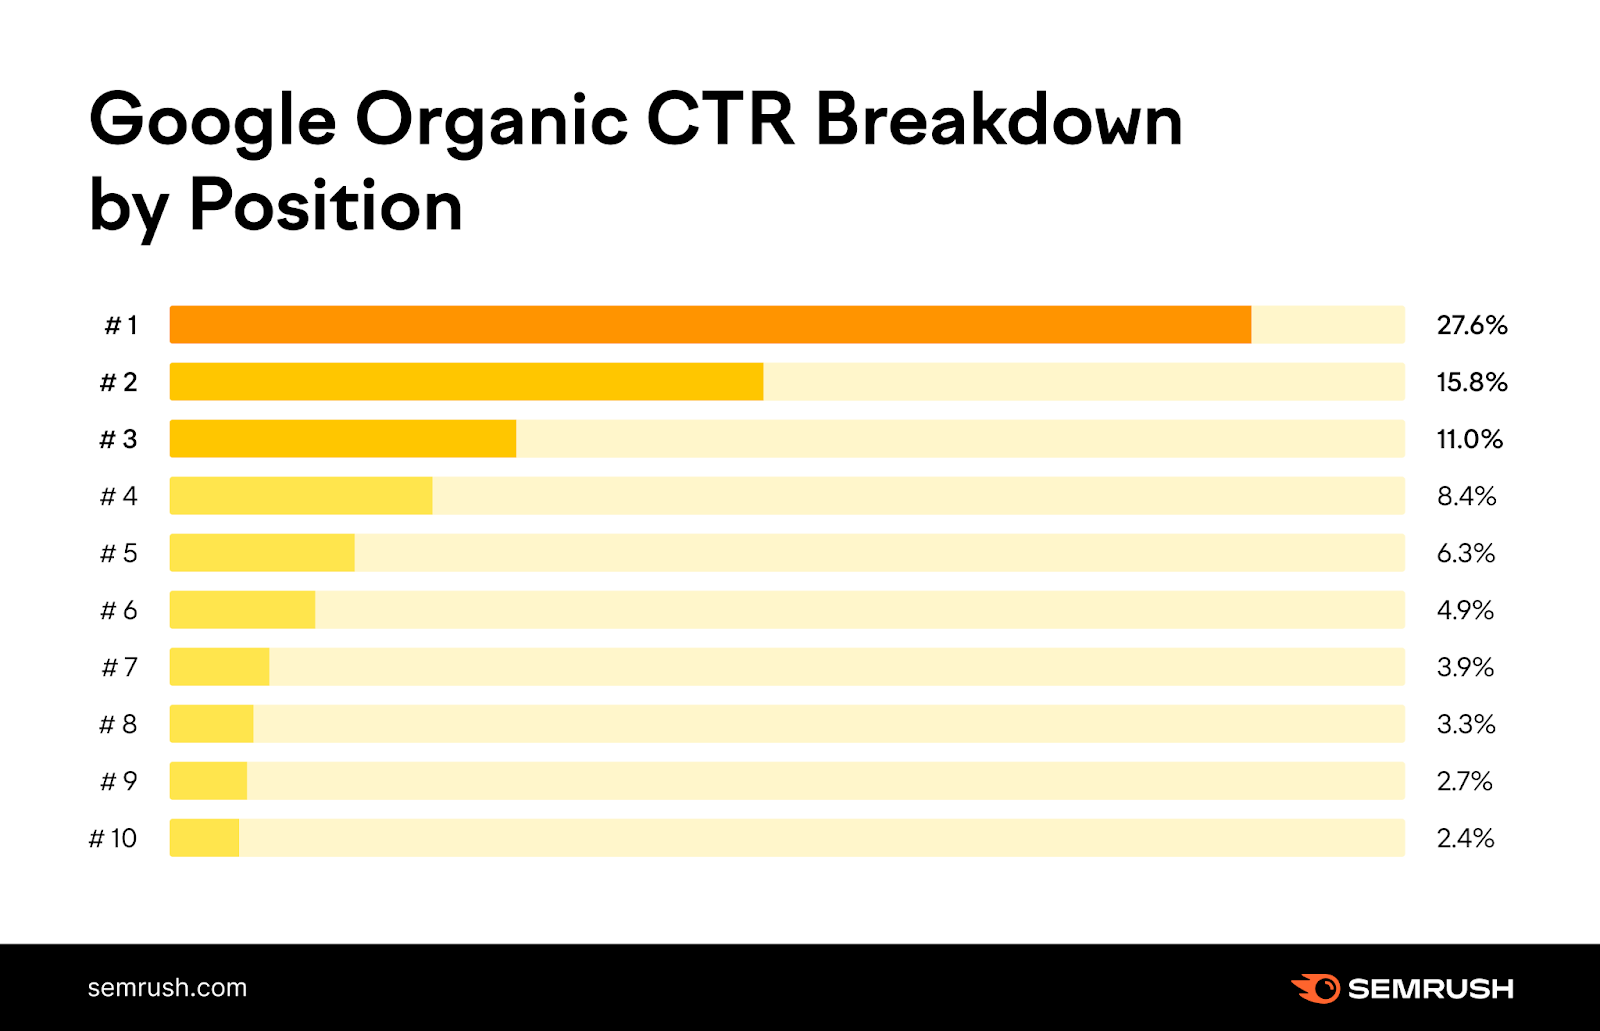 A graph showing Google organic CTR breakdown by position